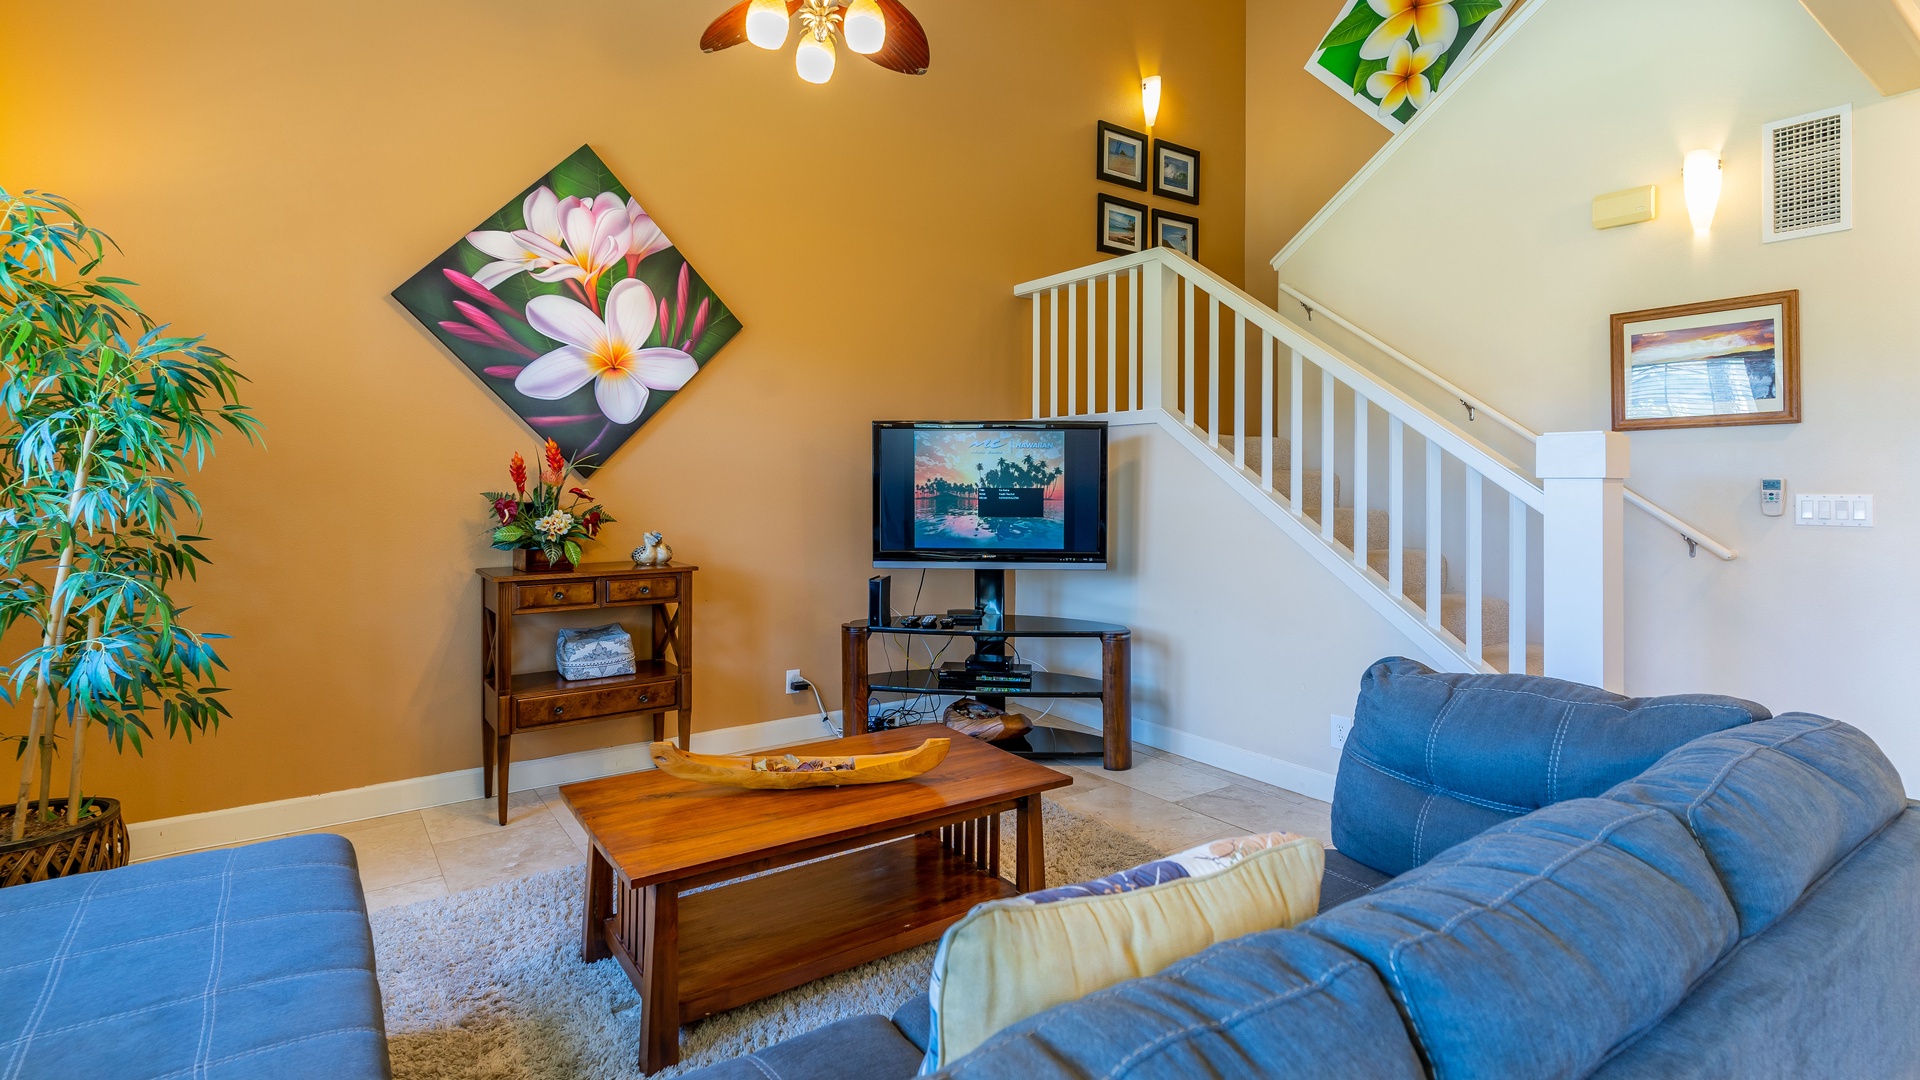 Kapolei Vacation Rentals, Ko Olina Kai 1033C - Relax for movie night on TV in the plush living area near the stairs.